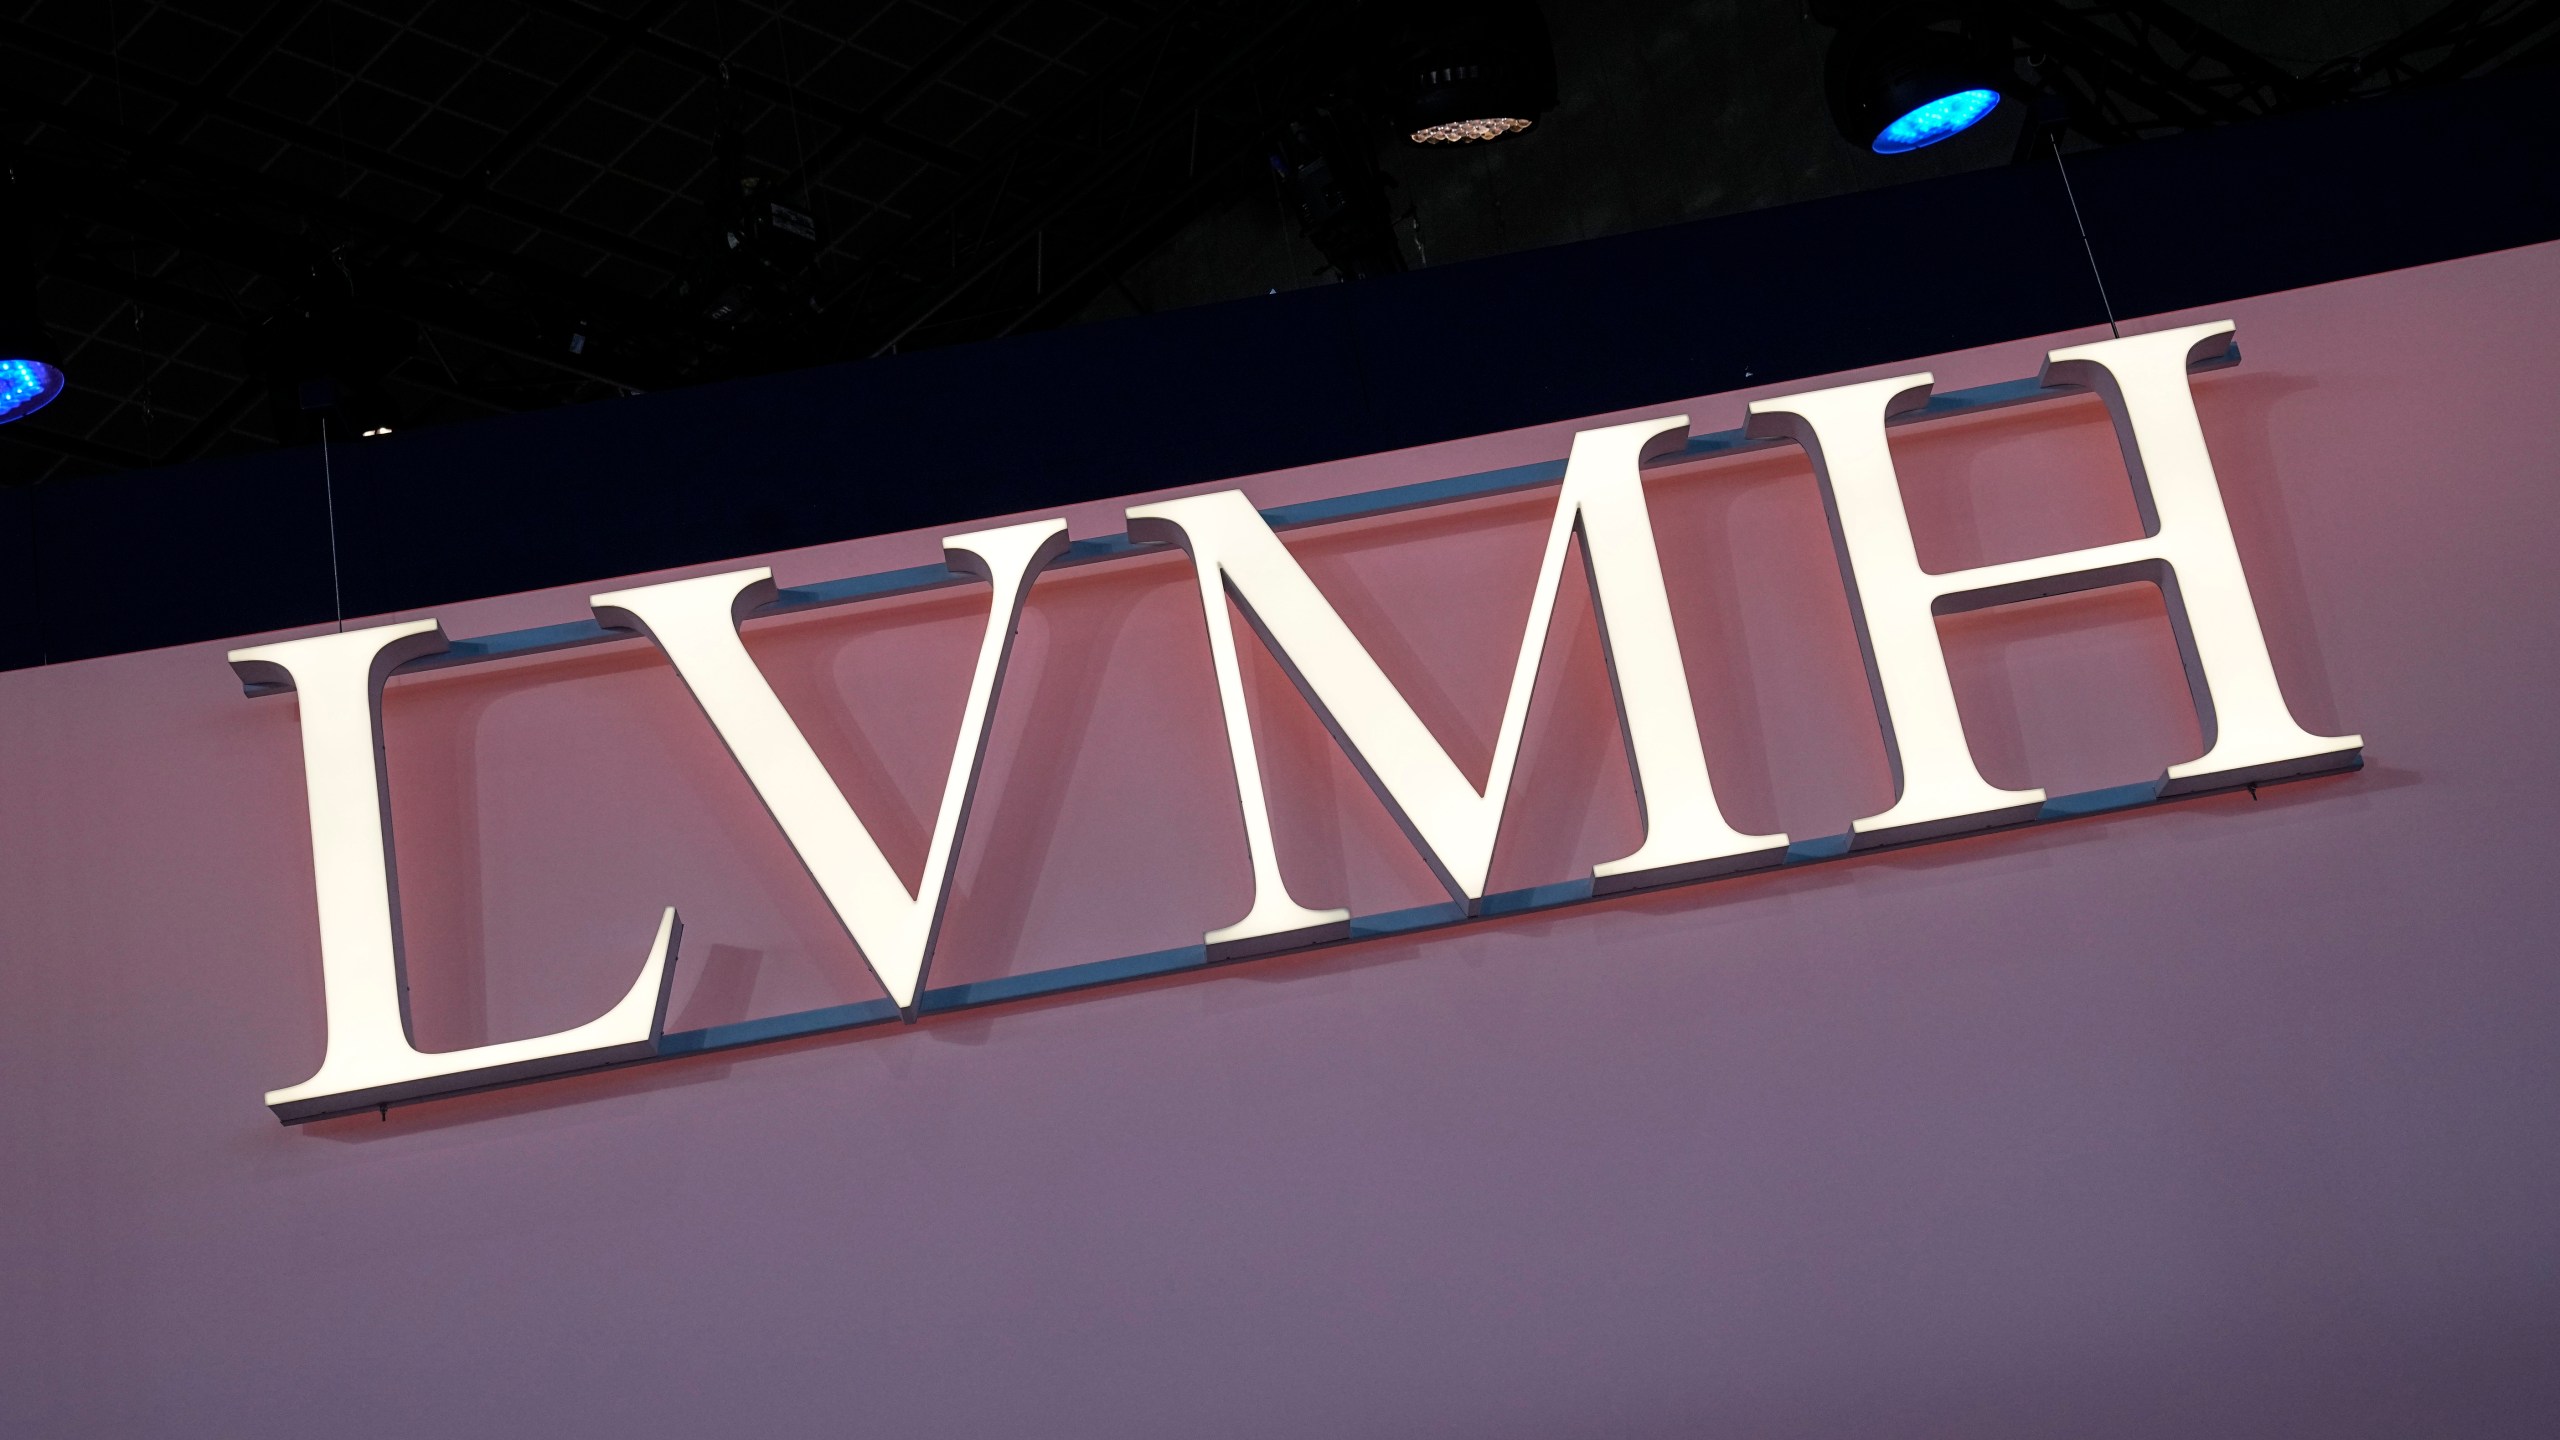 FILE - The LVMH logo is photographed at the Vivatech show in Paris, June 15, 2023. A pioneering bill to curb the rampant pace of fast fashion won unanimous approval in the French Parliament, making France one of the first countries in the world to target the influx of low-cost, mass-produced garments. It's a measure that promotes environmental protection and aims to safeguard France's prized fashion industry—in a week when French President Emmanuel Macron feted luxury giant LVMH CEO Bernard Arnault with the Legion d'Honneur, France's greatest civilian honor. (AP Photo/Michel Euler, File)